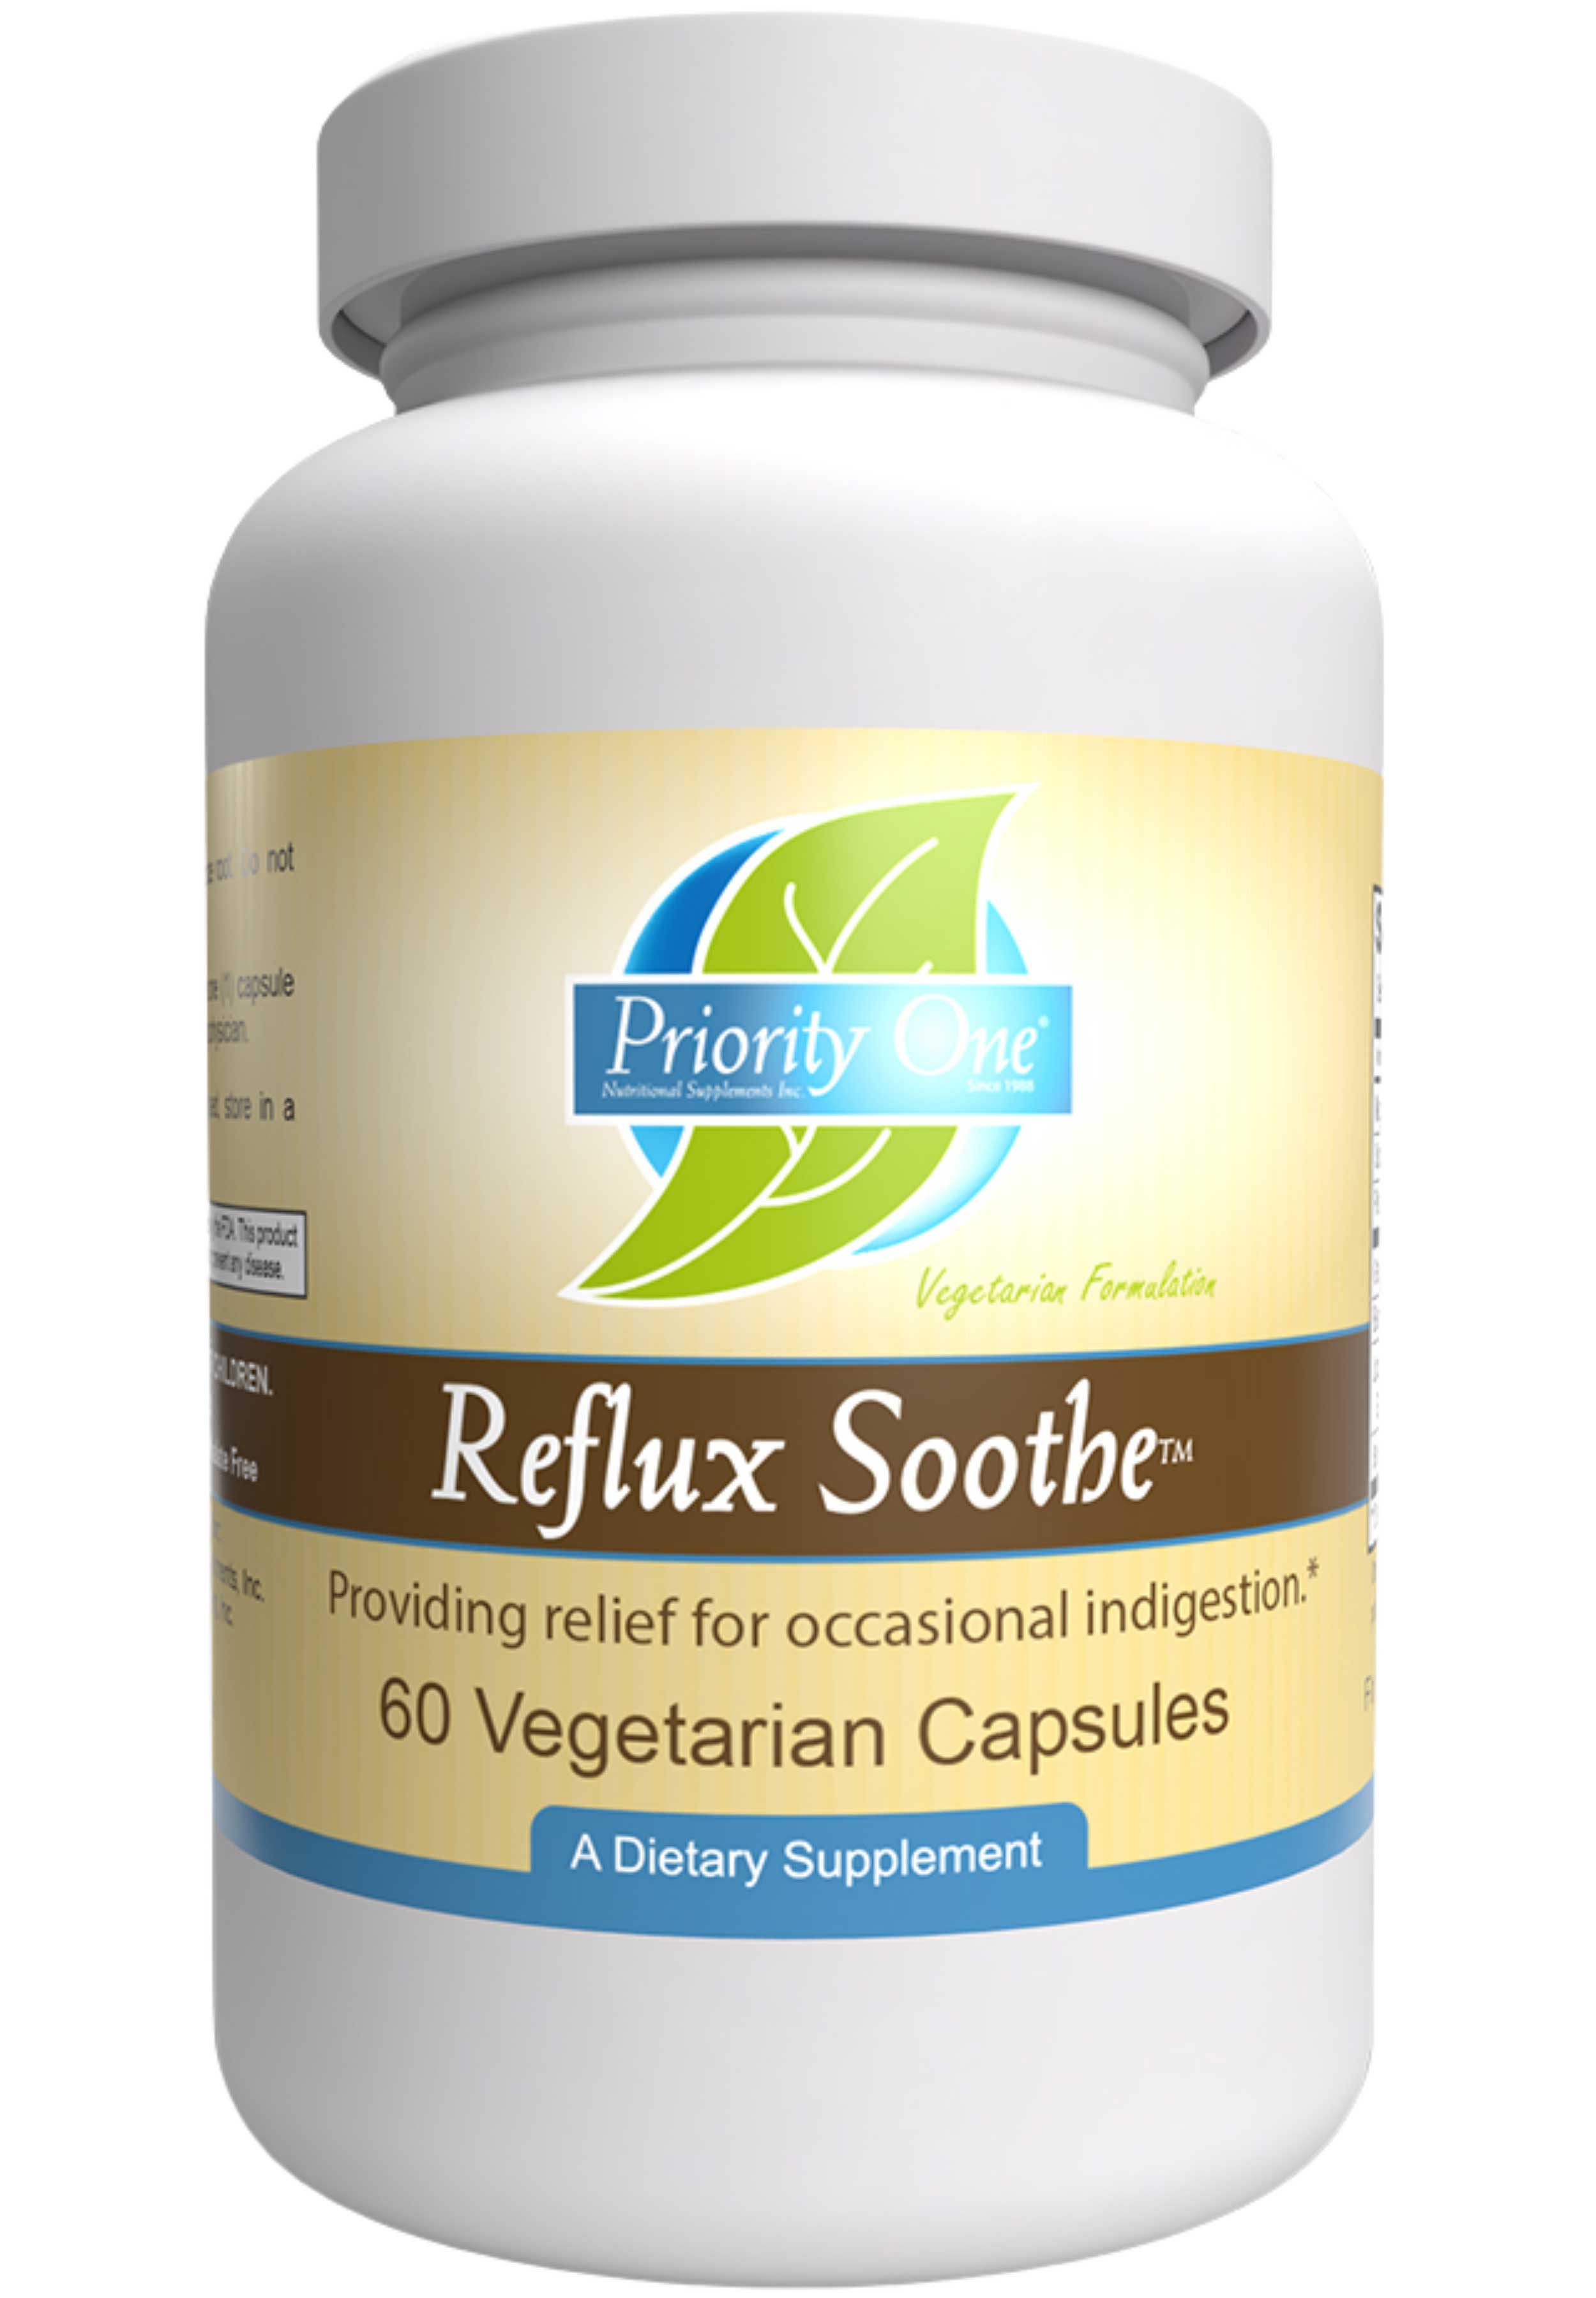 Priority One Reflux Soothe